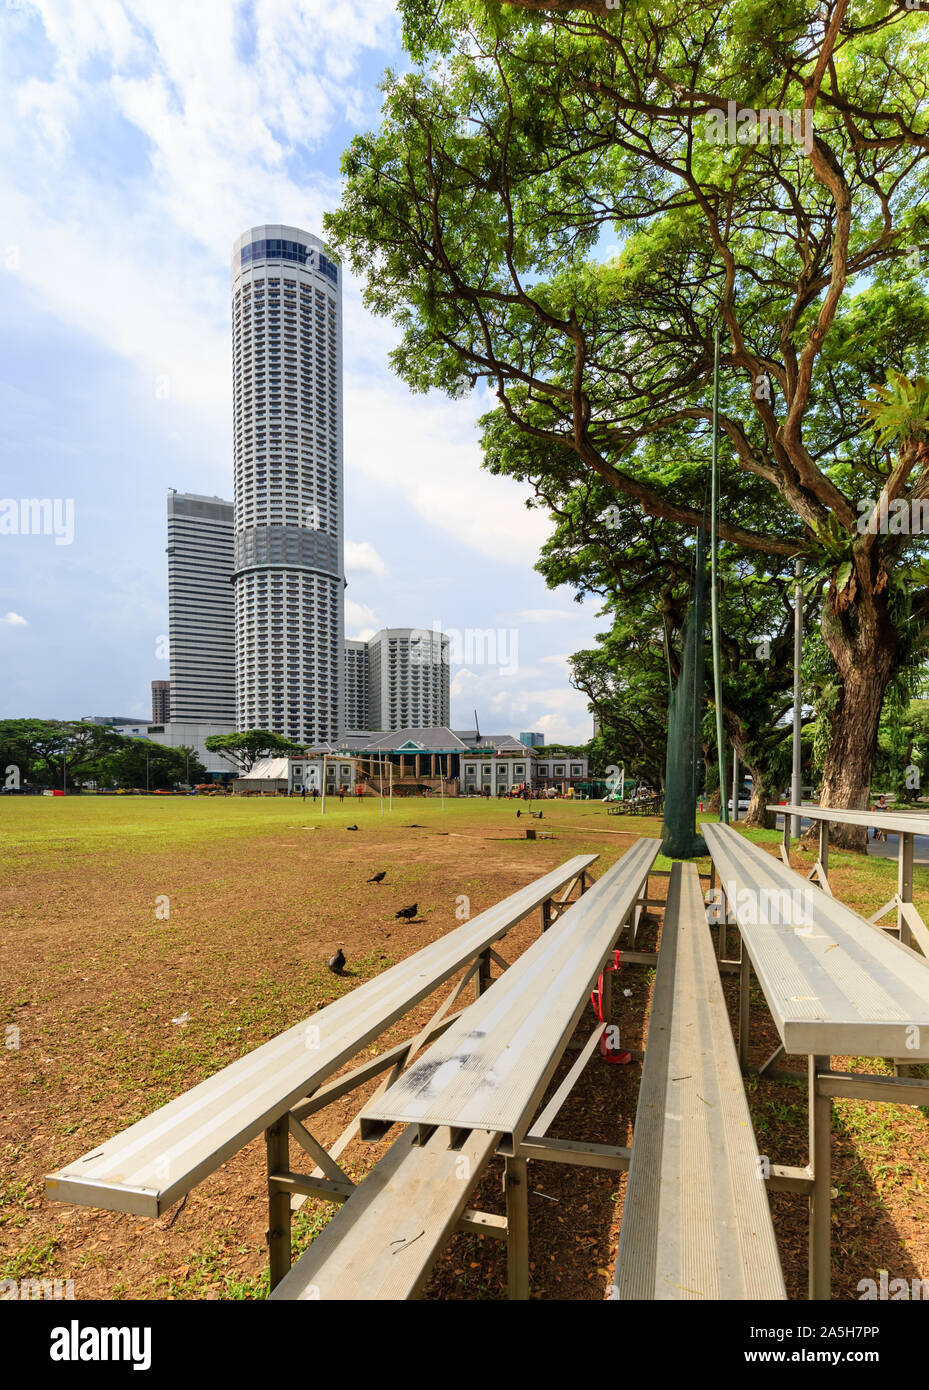 Singapore-05 MAY 2018:Singapore Padang play field lawn day view Stock Photo